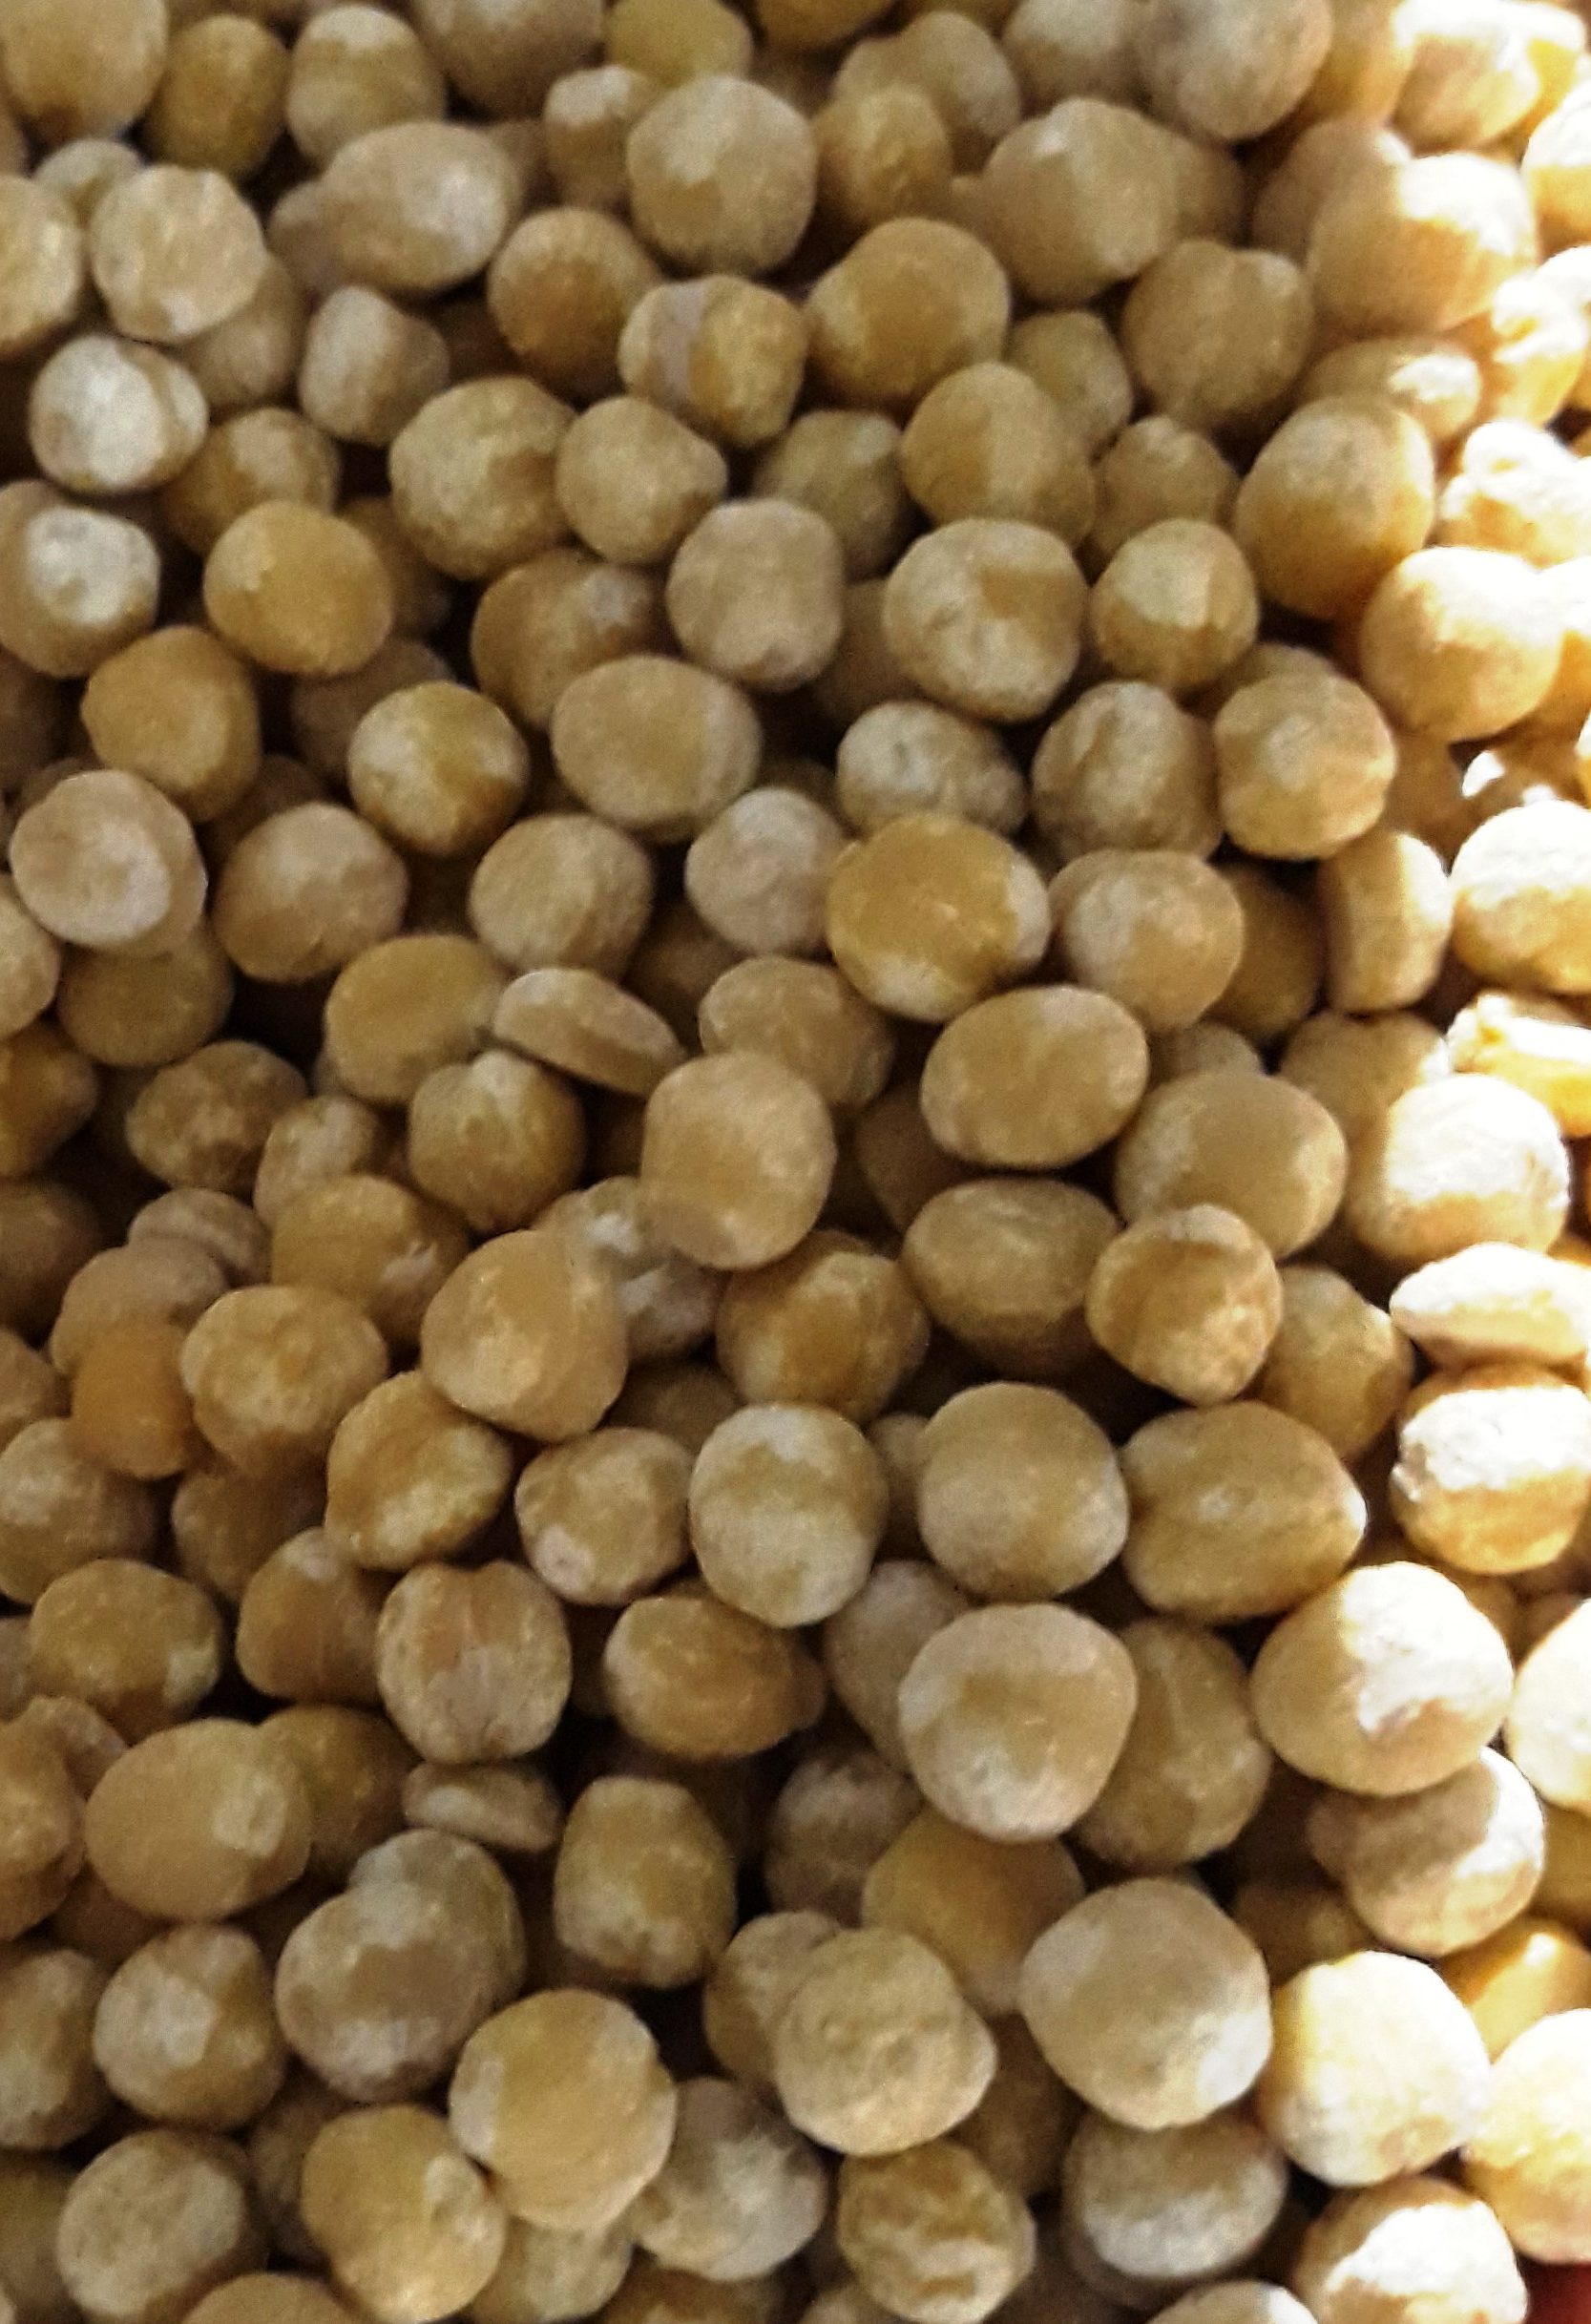 Decorticated Chickpeas